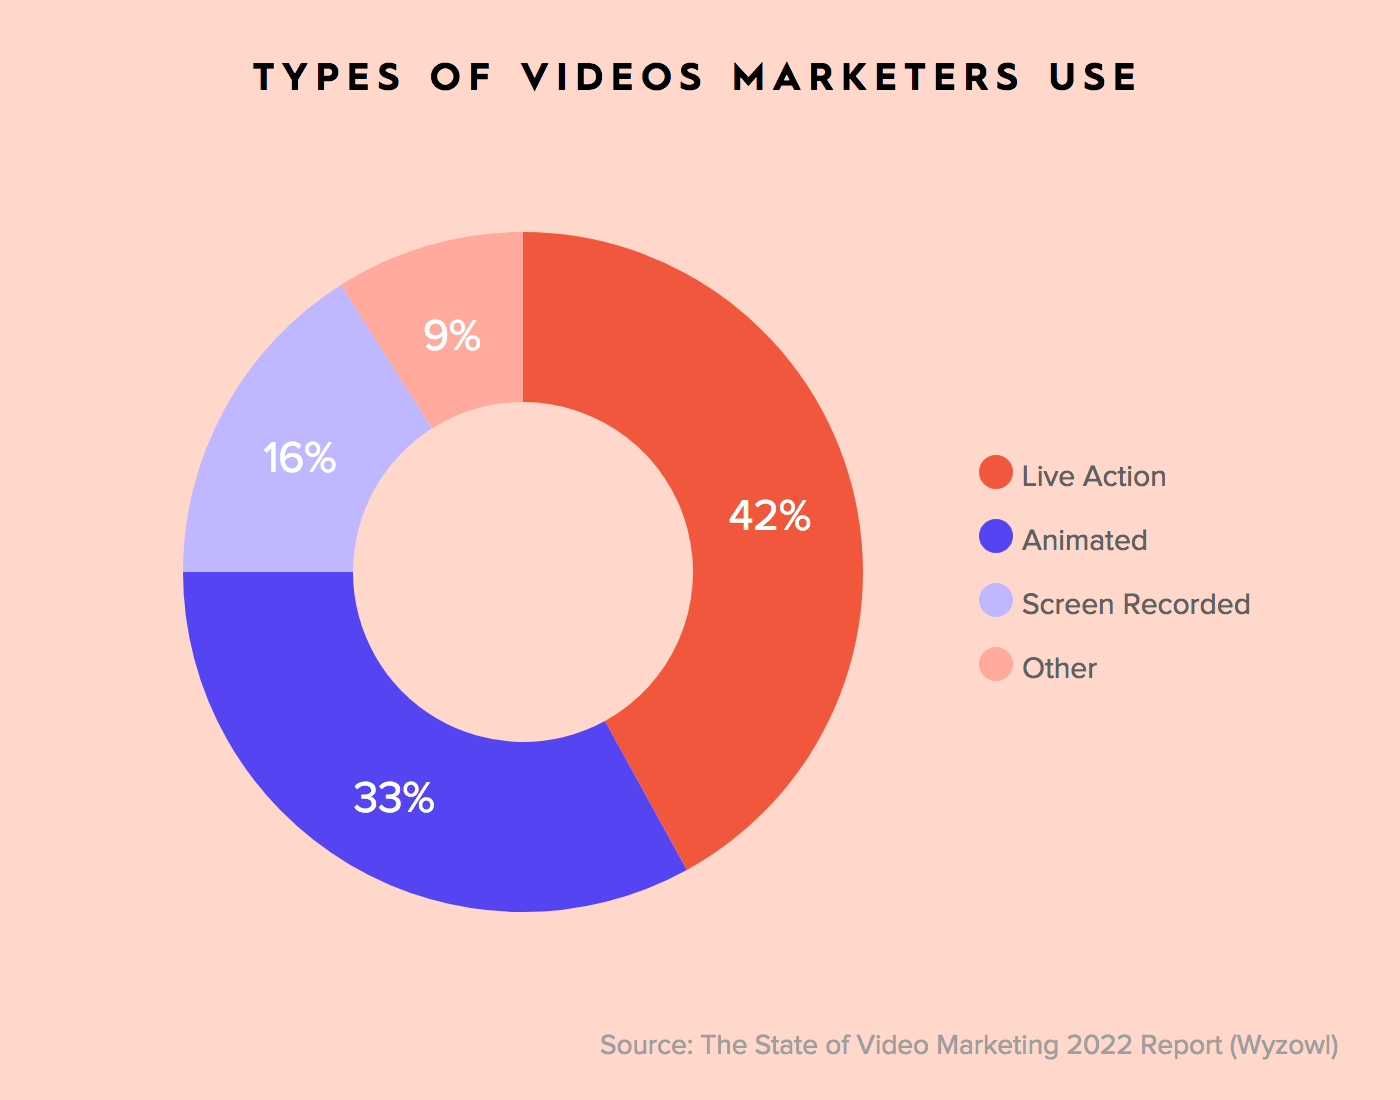 5 Reasons to Start Video Marketing (According to the Data)